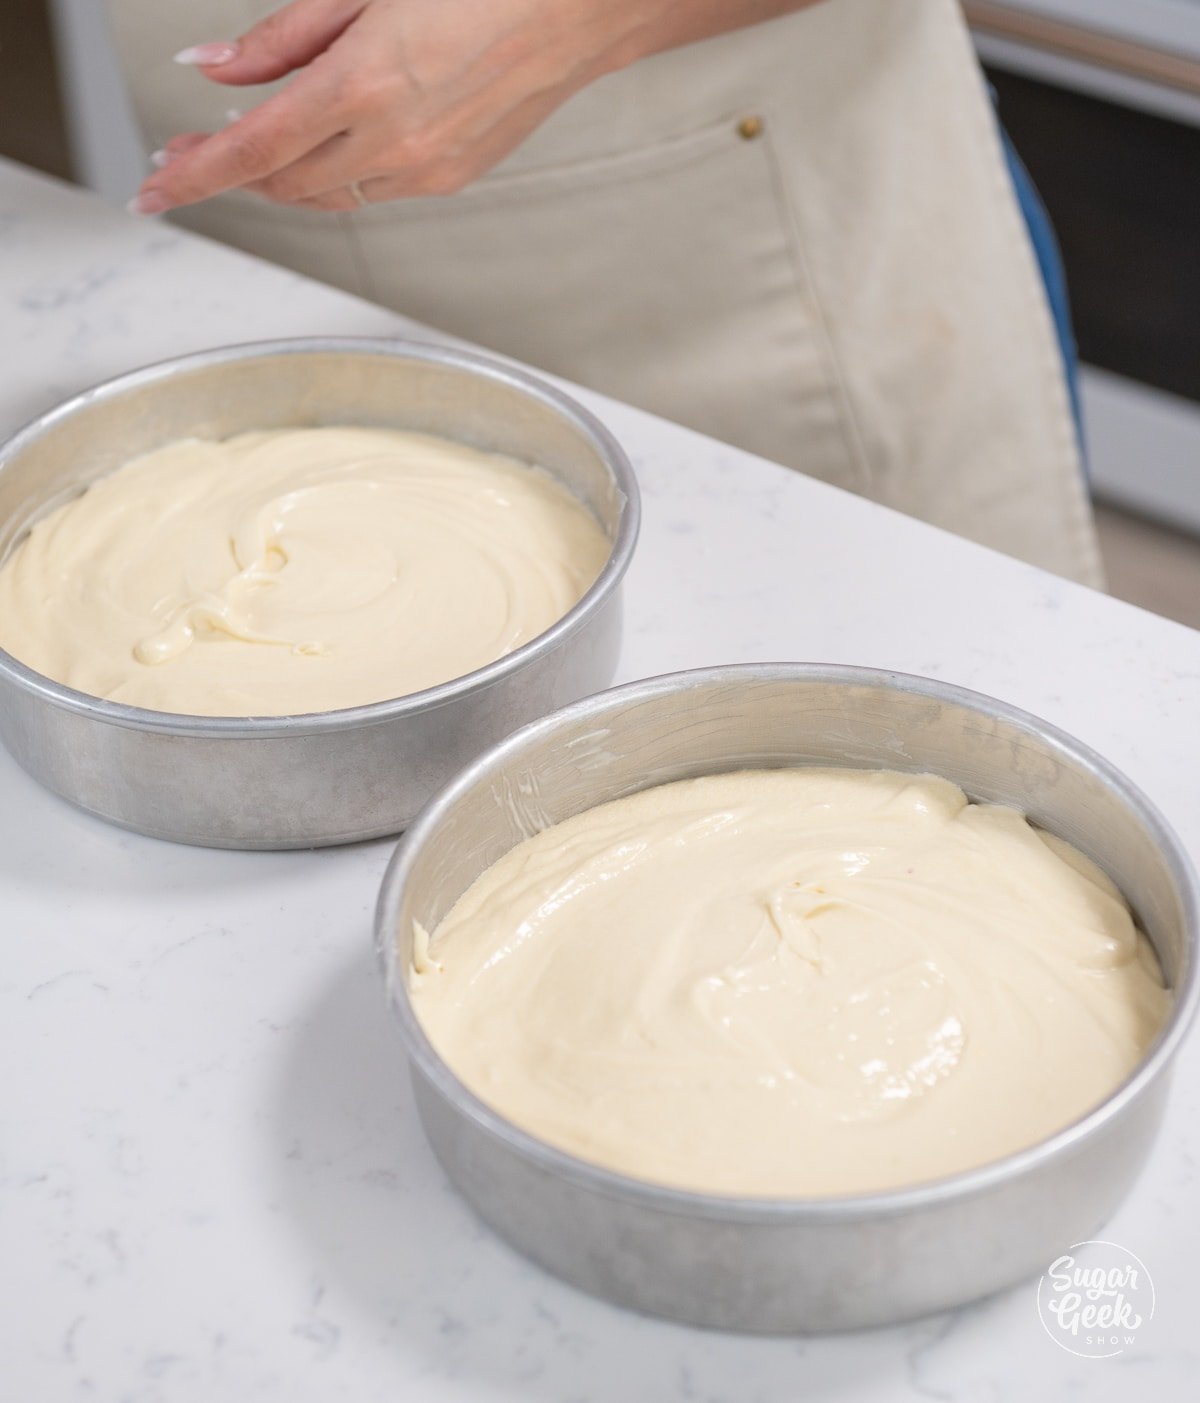 picture of two cake pans filled with cake batter.